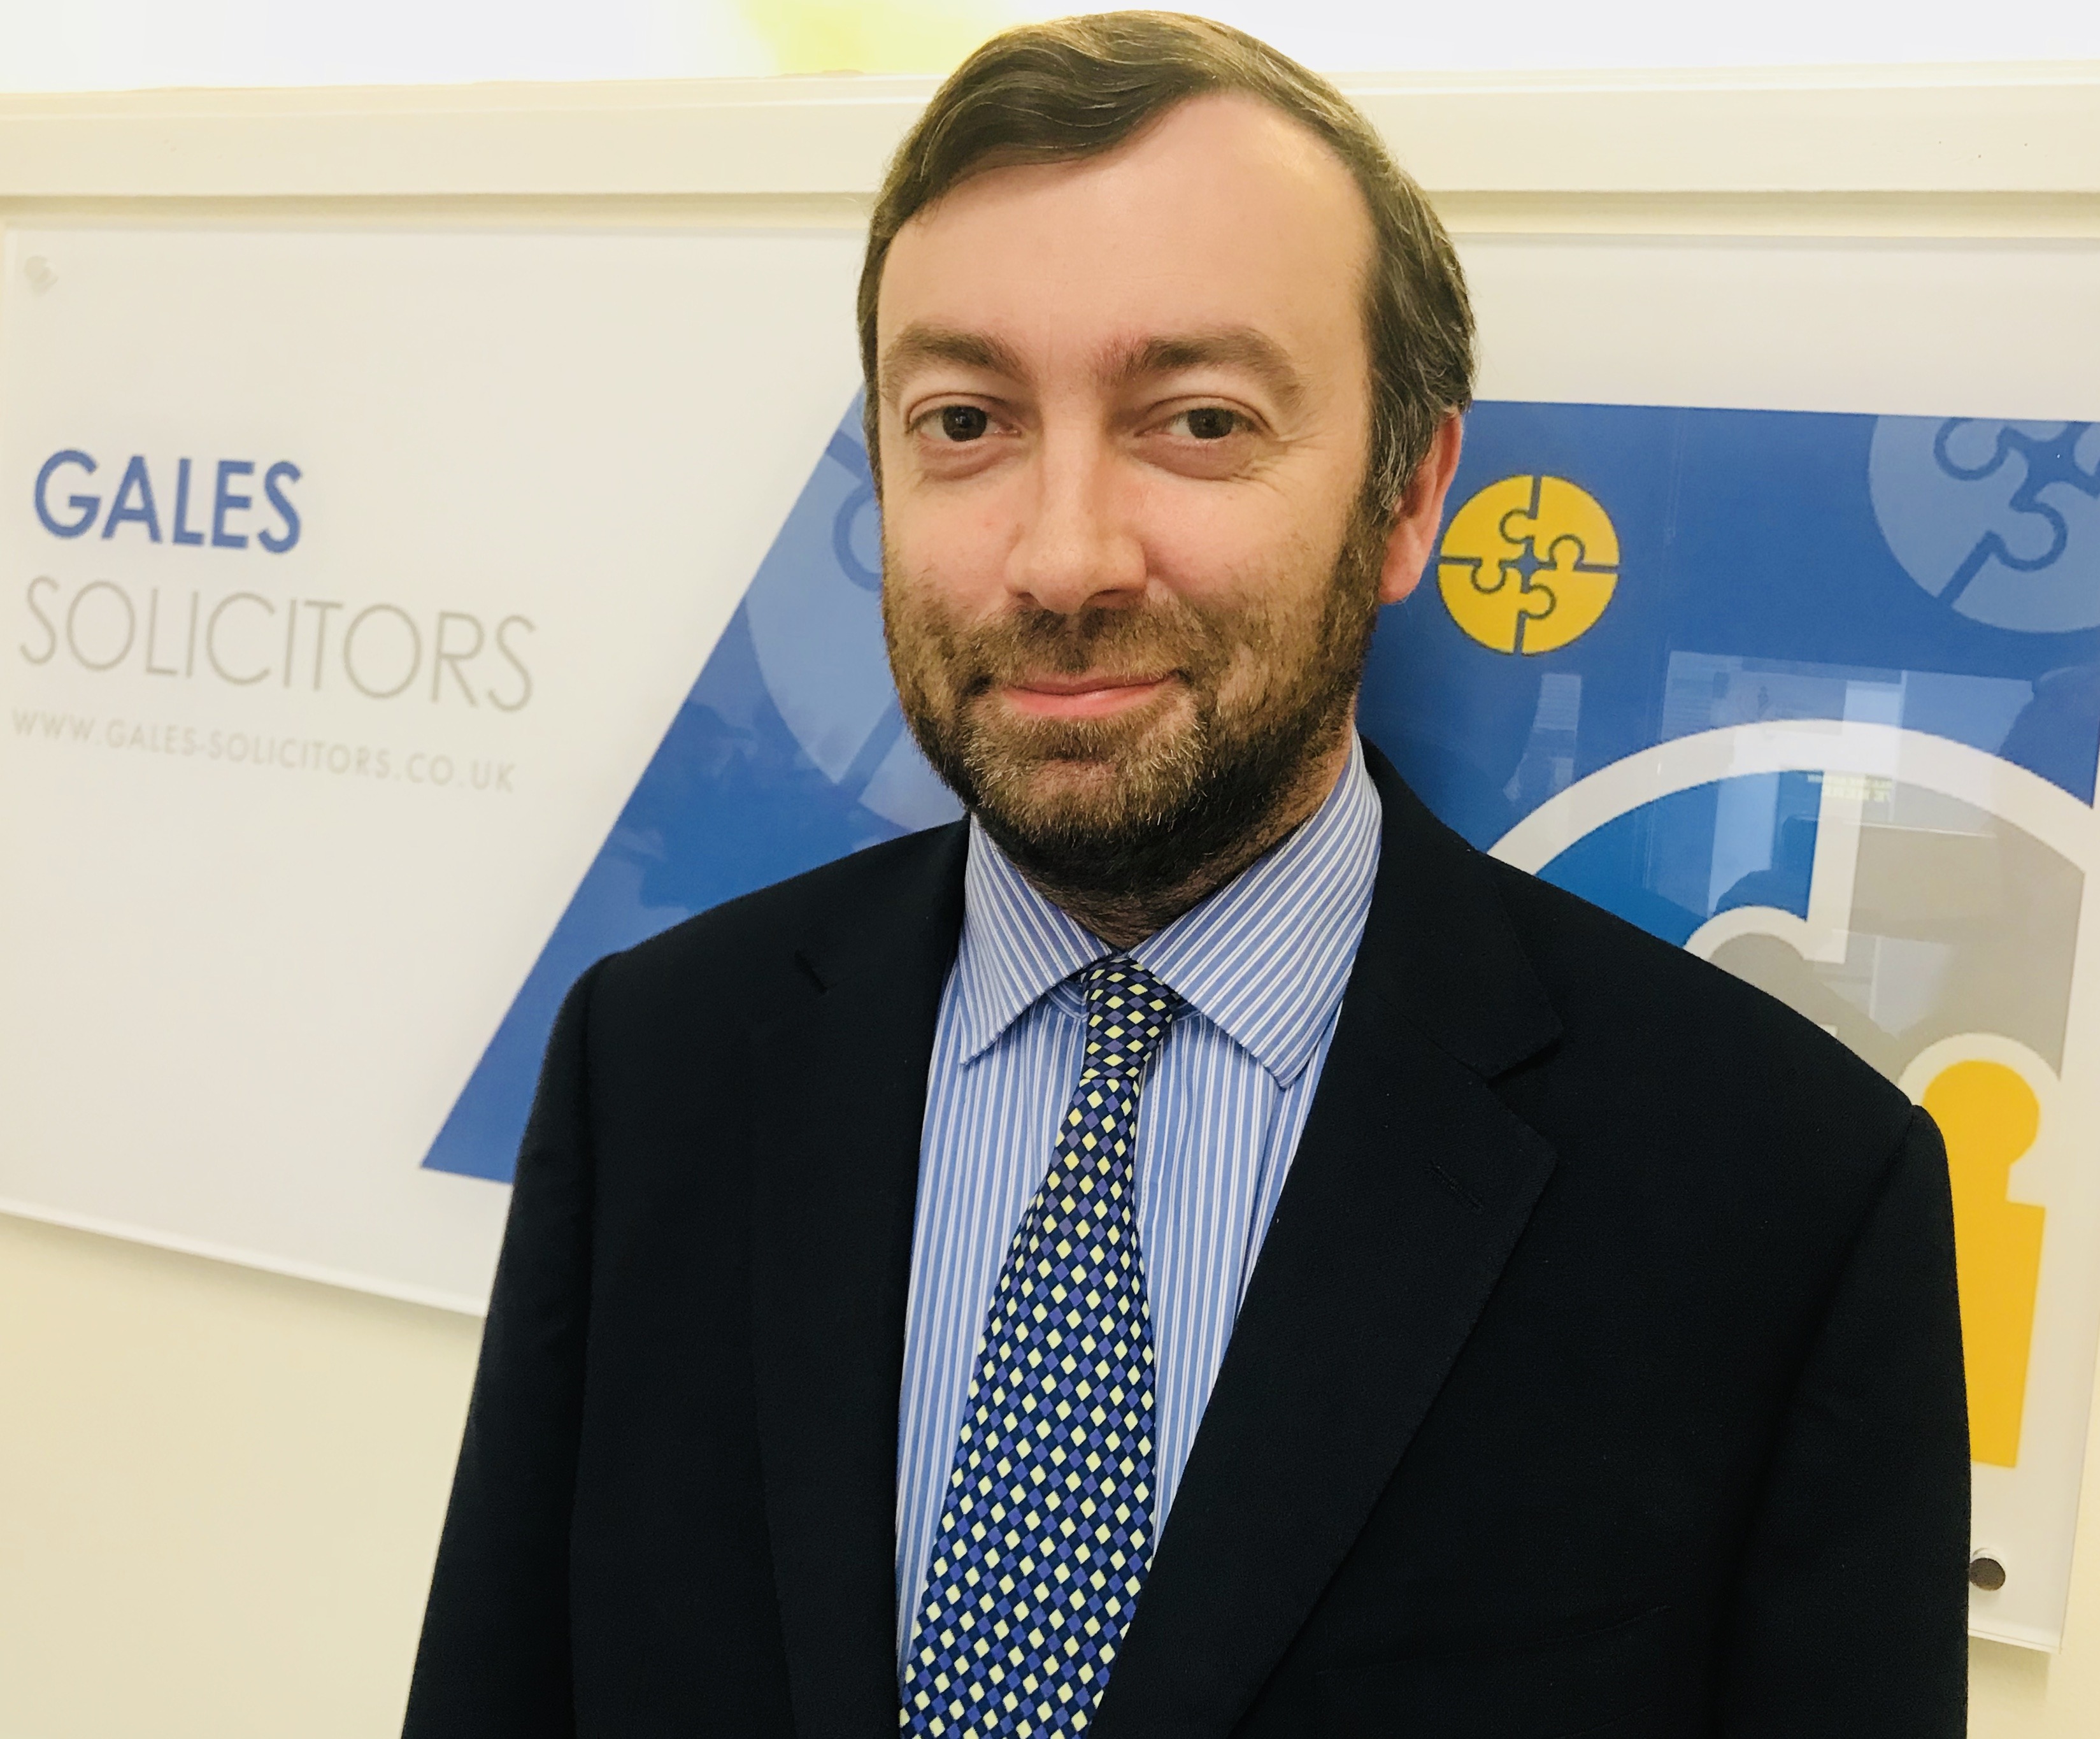 Gales Solicitor, Matthew Moore oversees successful Citizens Advice mergers